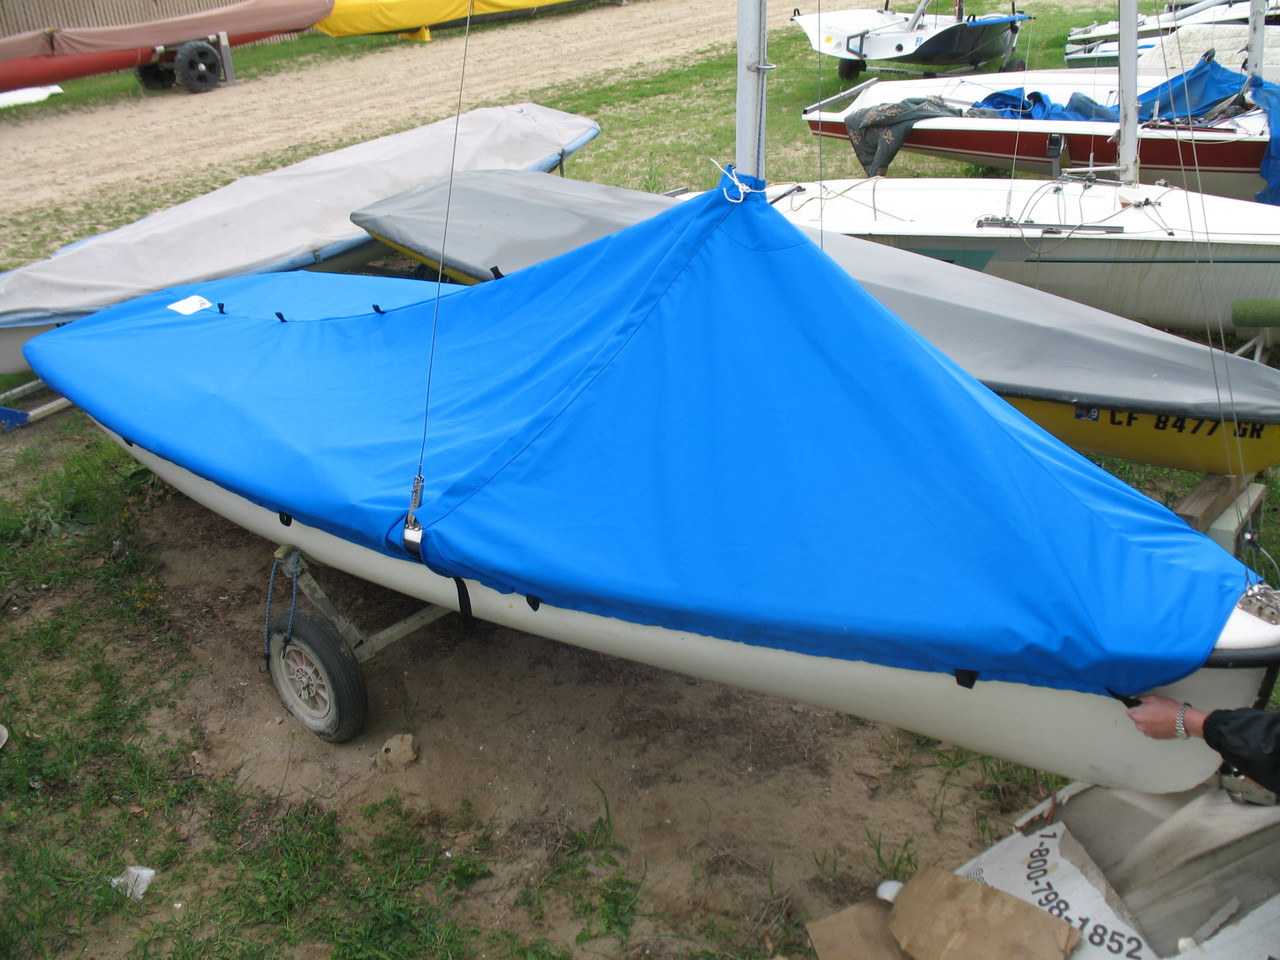 420 sailboat Mast Up Peaked Cover by SLO Sail and Canvas - shown in Polyester Royal Blue. Available in 3 fabrics and many color choices.
